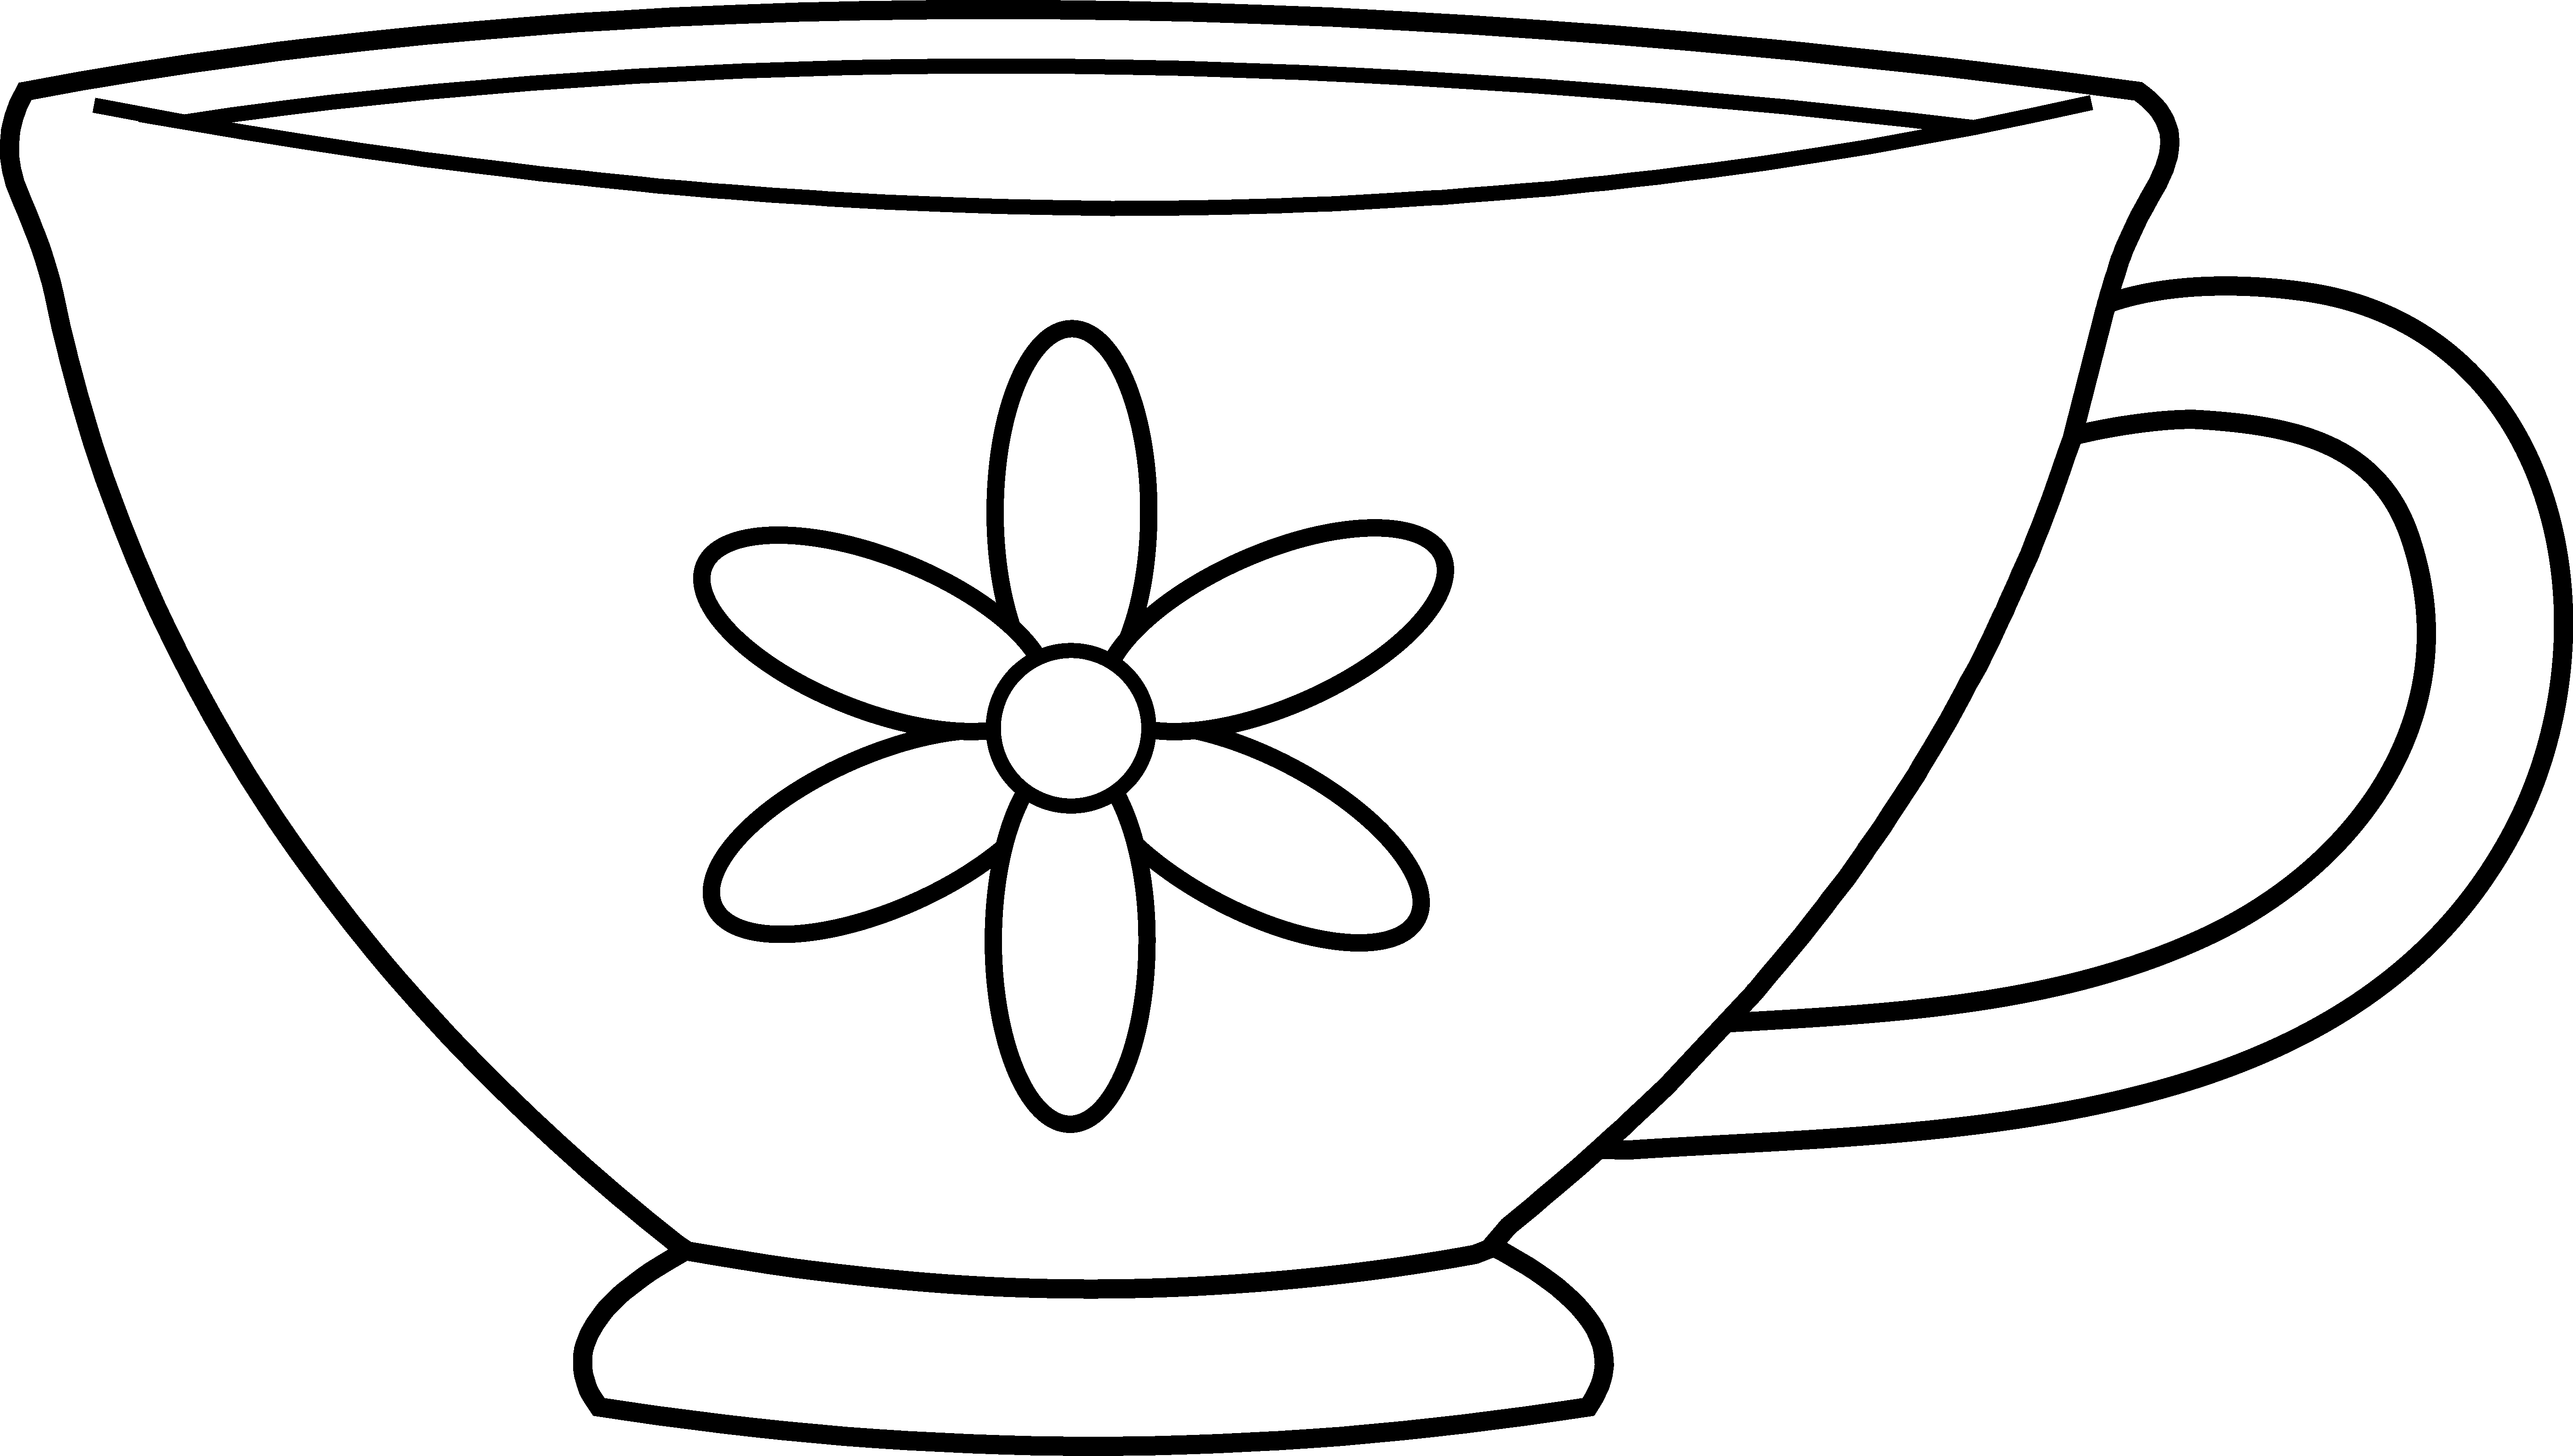 starbucks clipart colouring page